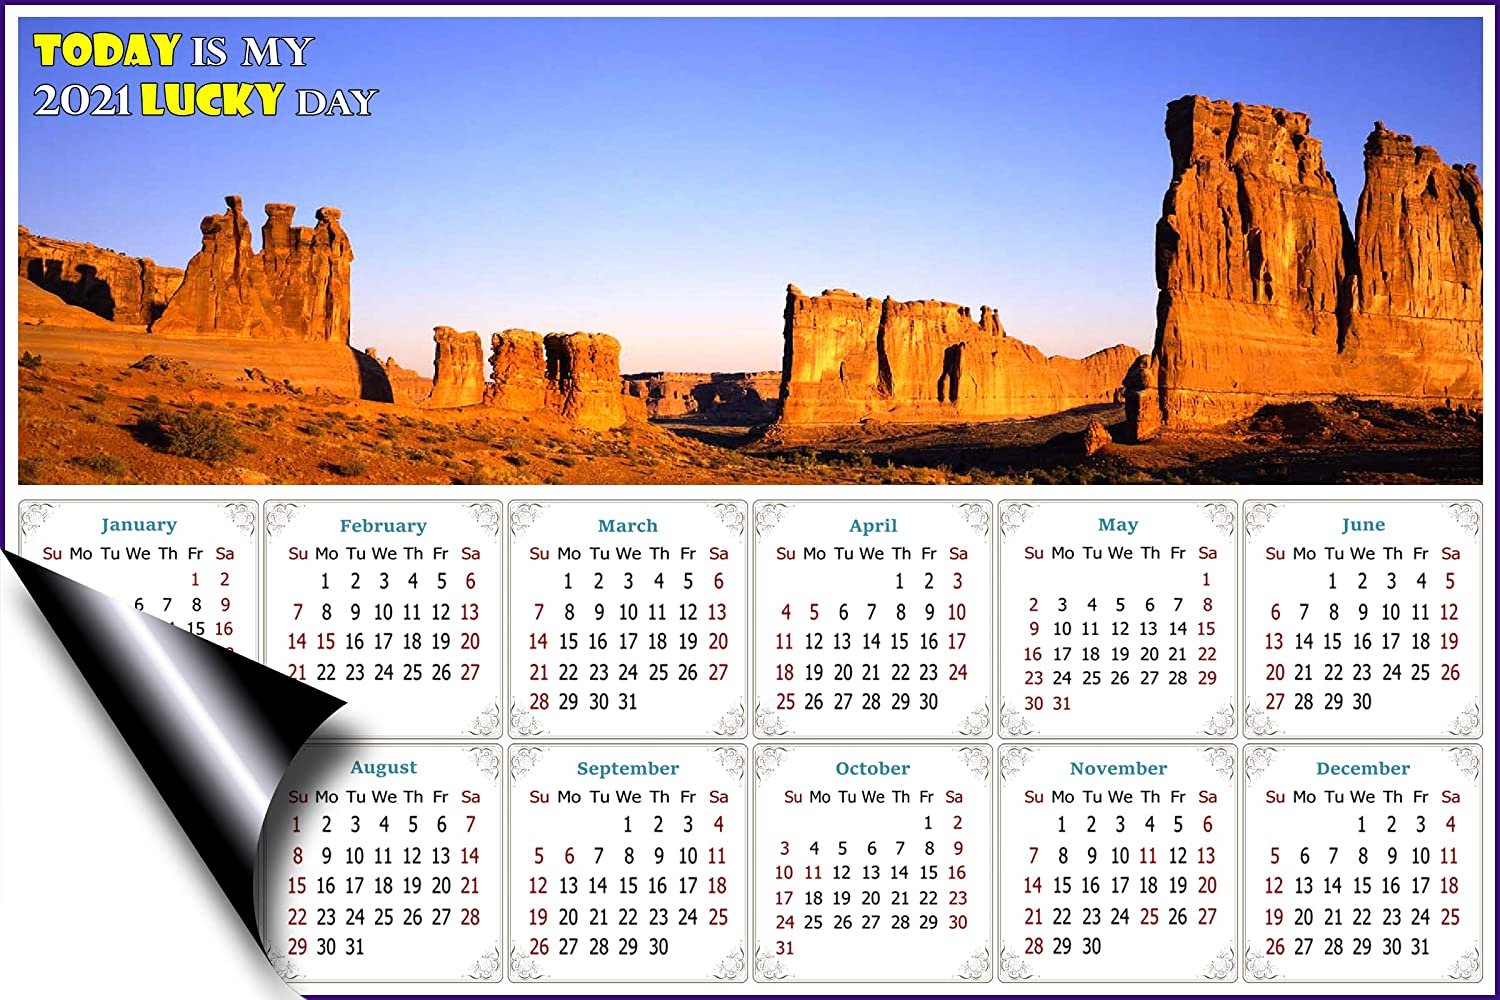 2021 Calendar Today is My Lucky Day (Arches National Park)